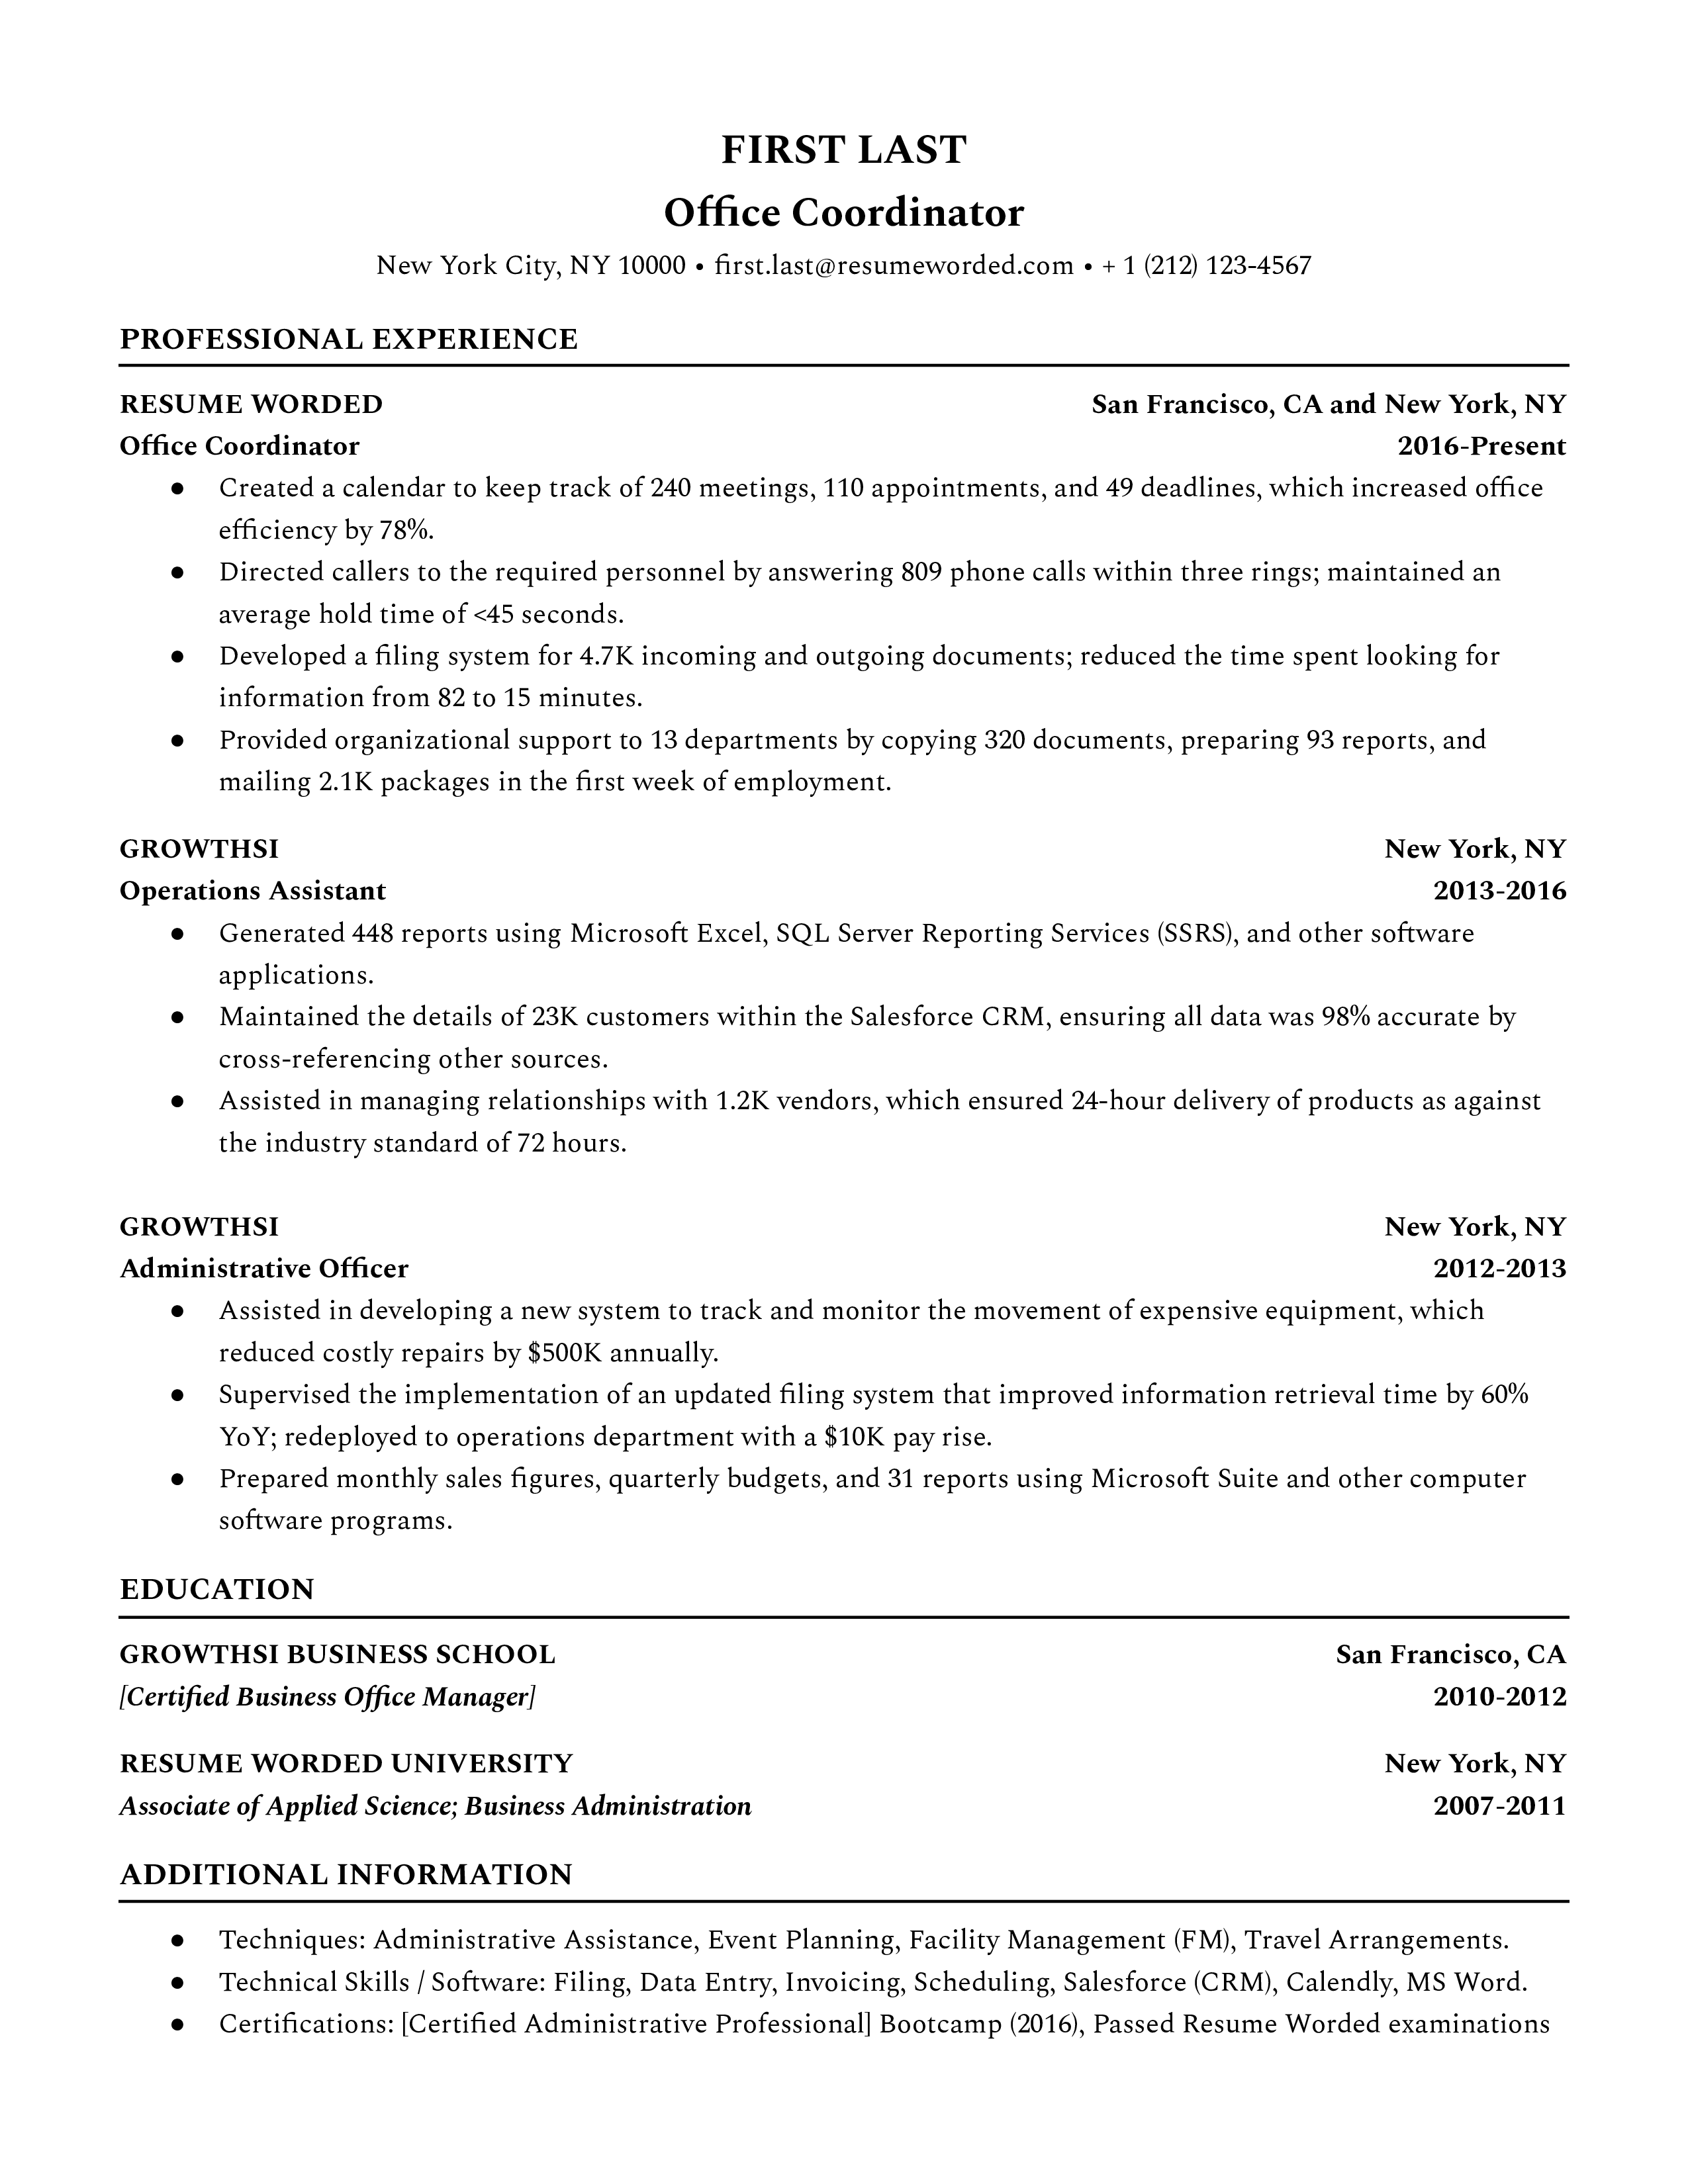 A CV for office coordinator showing proficiency in digital tools and efficient resource management.